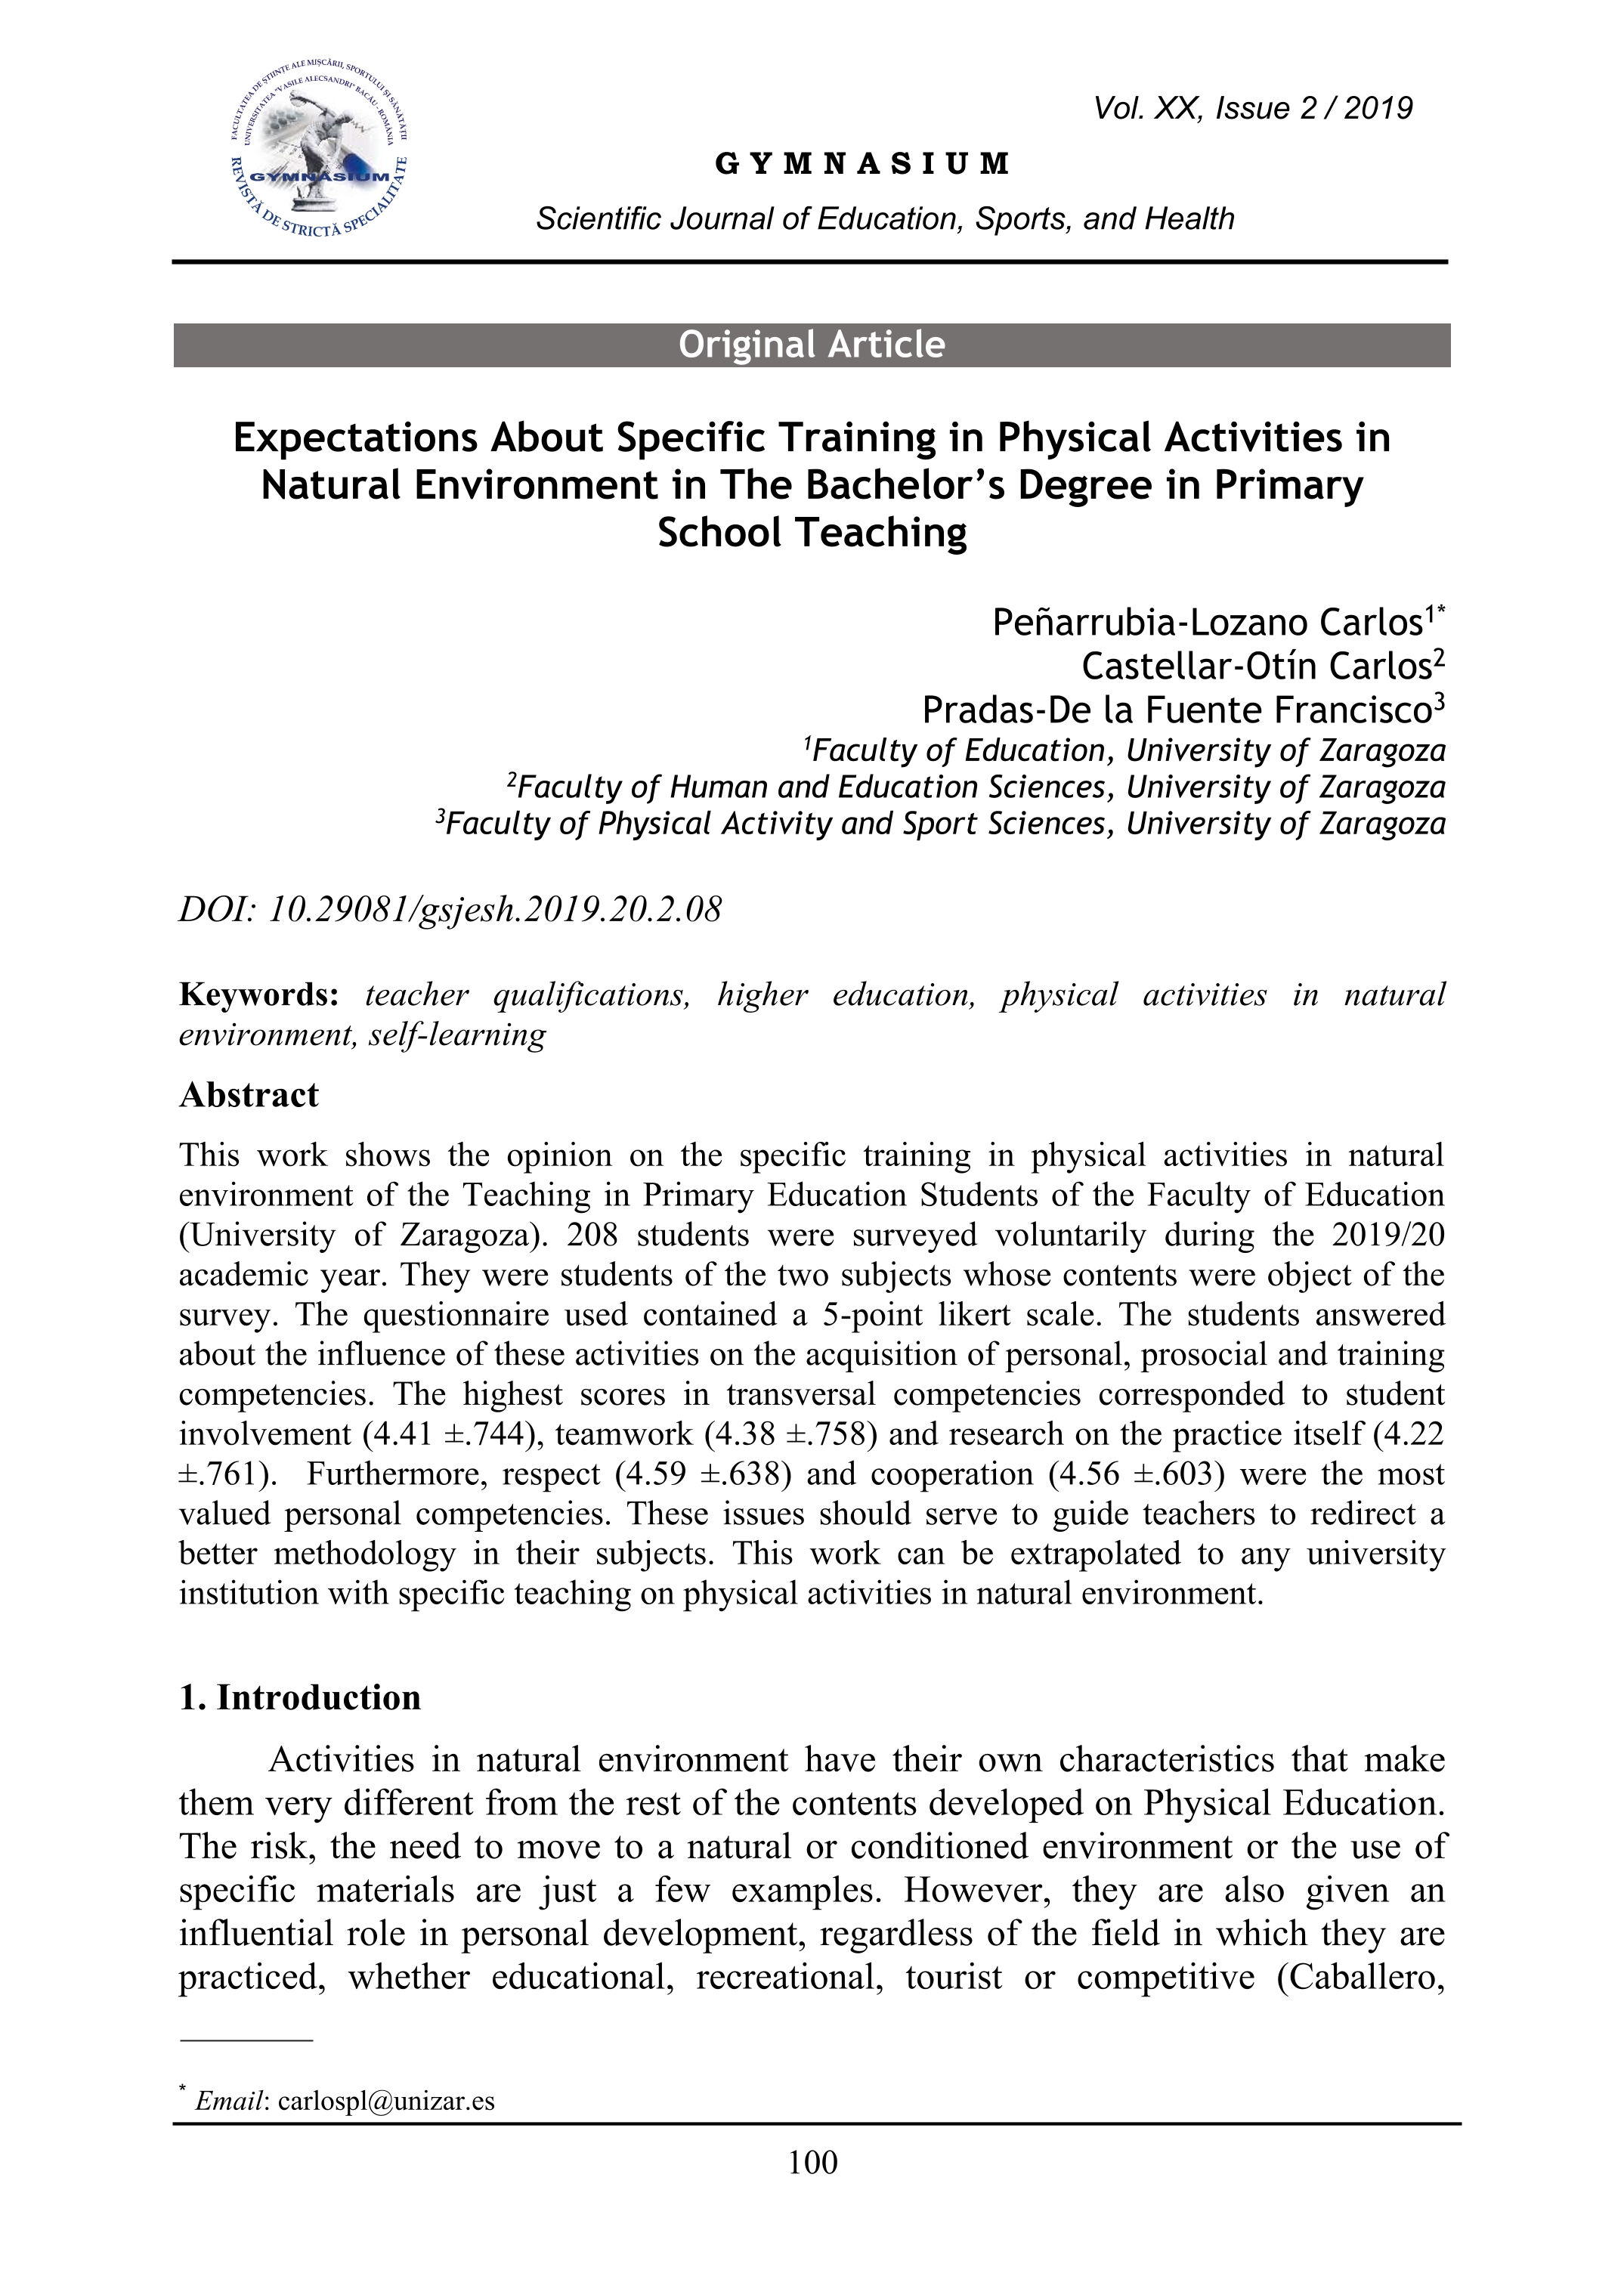 Expectations about specific training in physical activities in natural environment in the bachelor's degree in primary school teaching